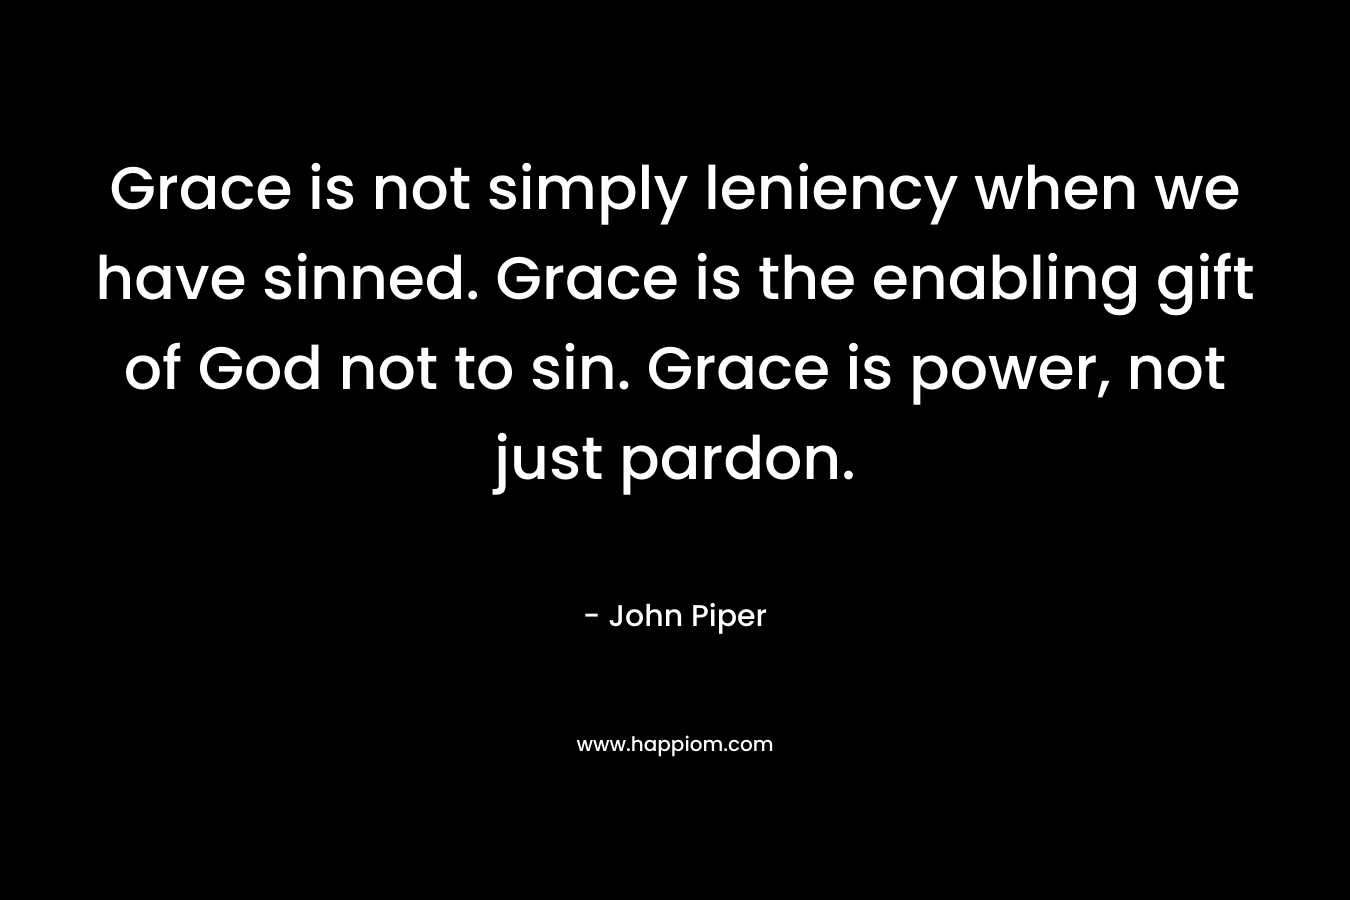 Grace is not simply leniency when we have sinned. Grace is the enabling gift of God not to sin. Grace is power, not just pardon. – John Piper